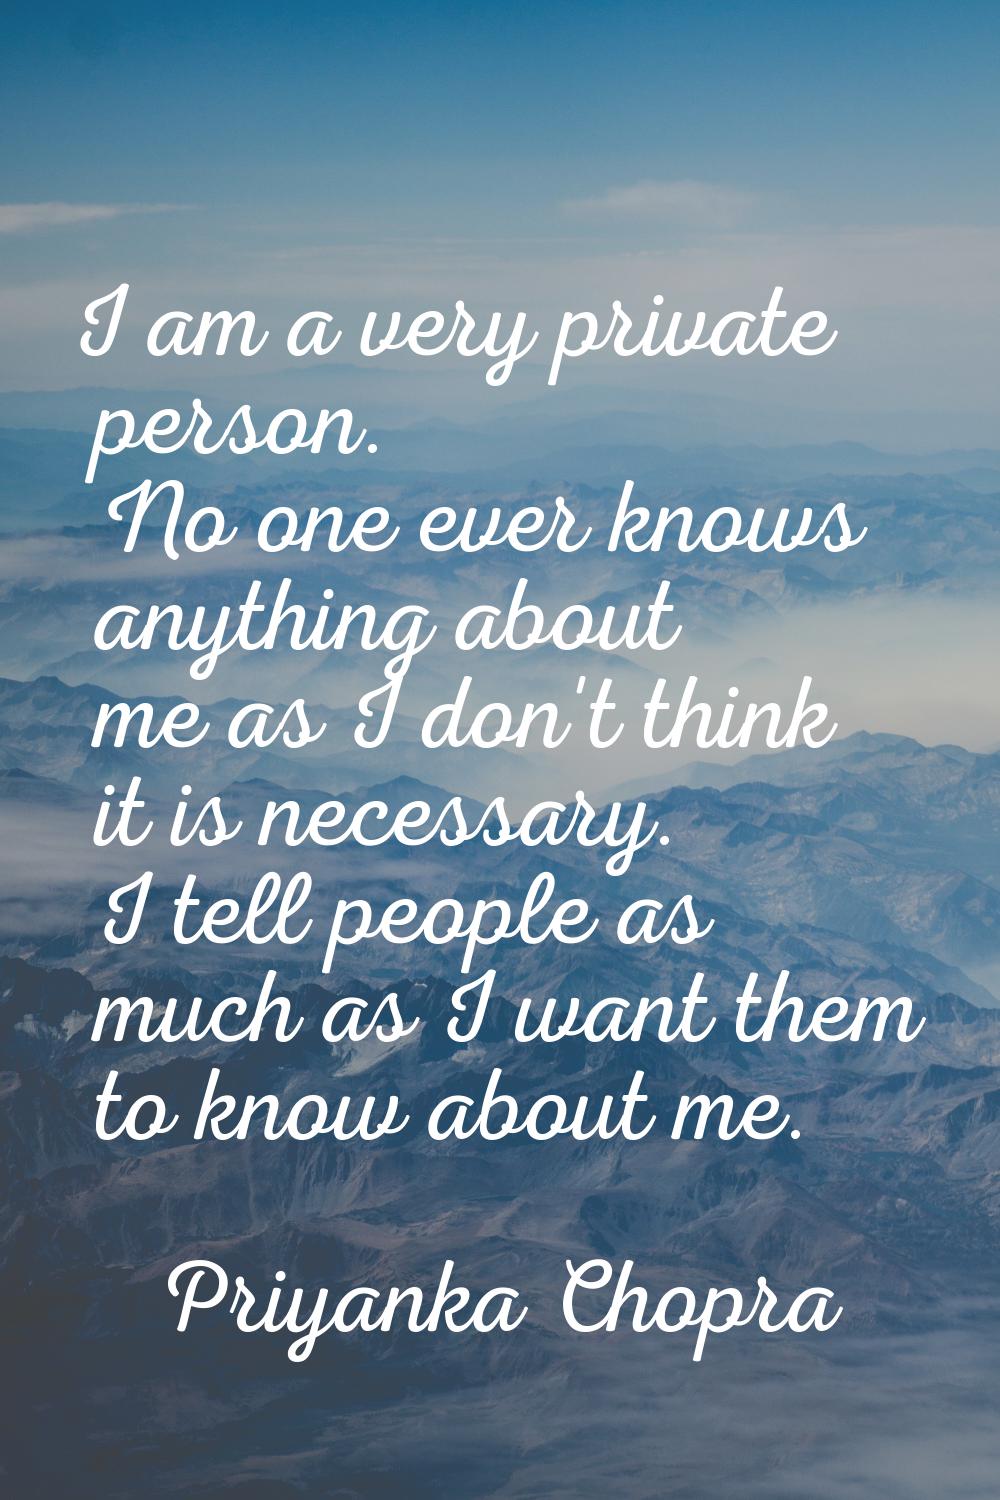 I am a very private person. No one ever knows anything about me as I don't think it is necessary. I